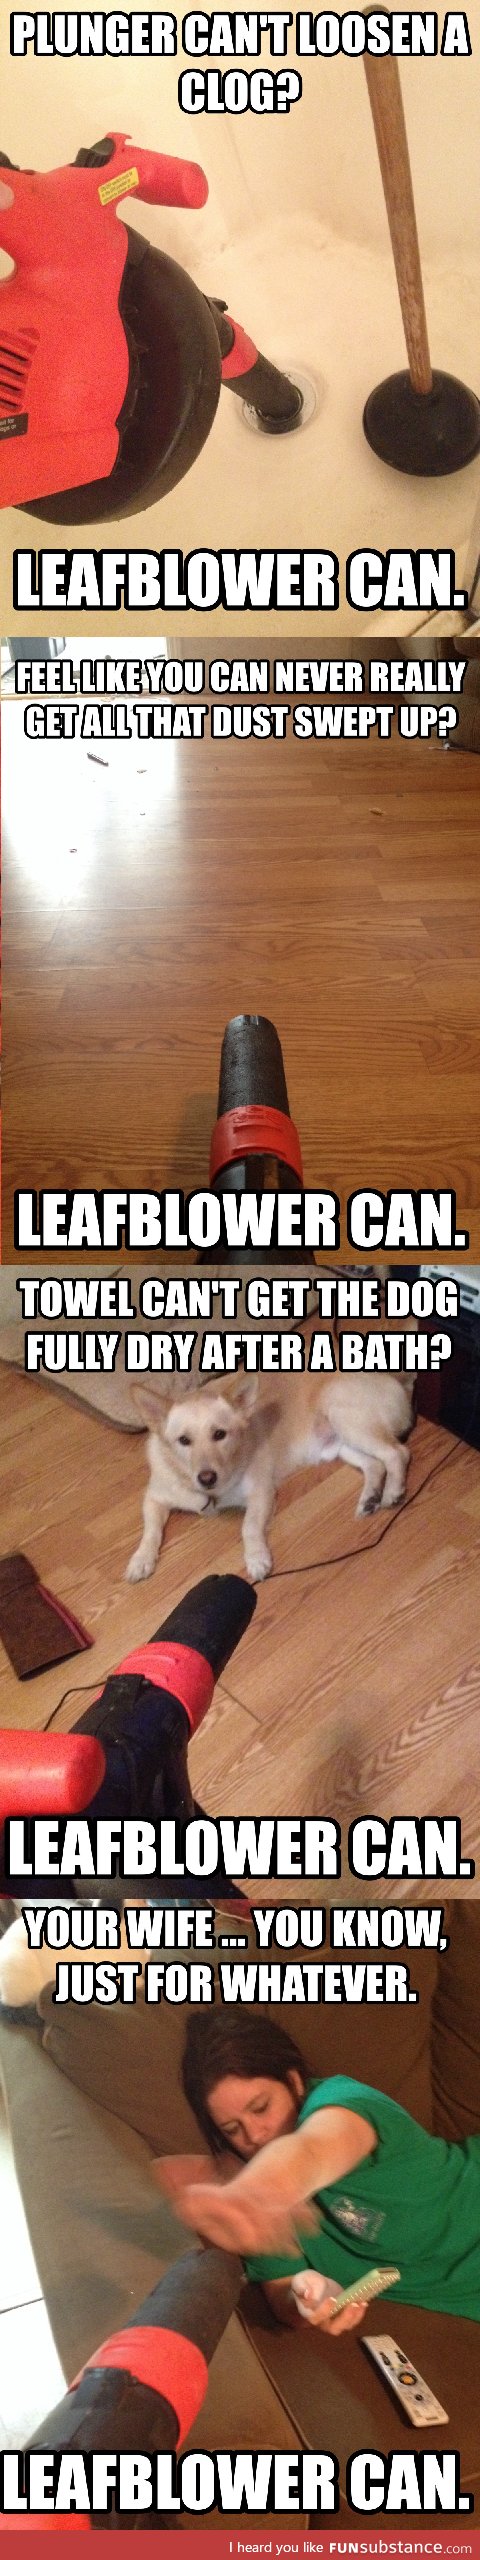 Leave blower can do lots of things